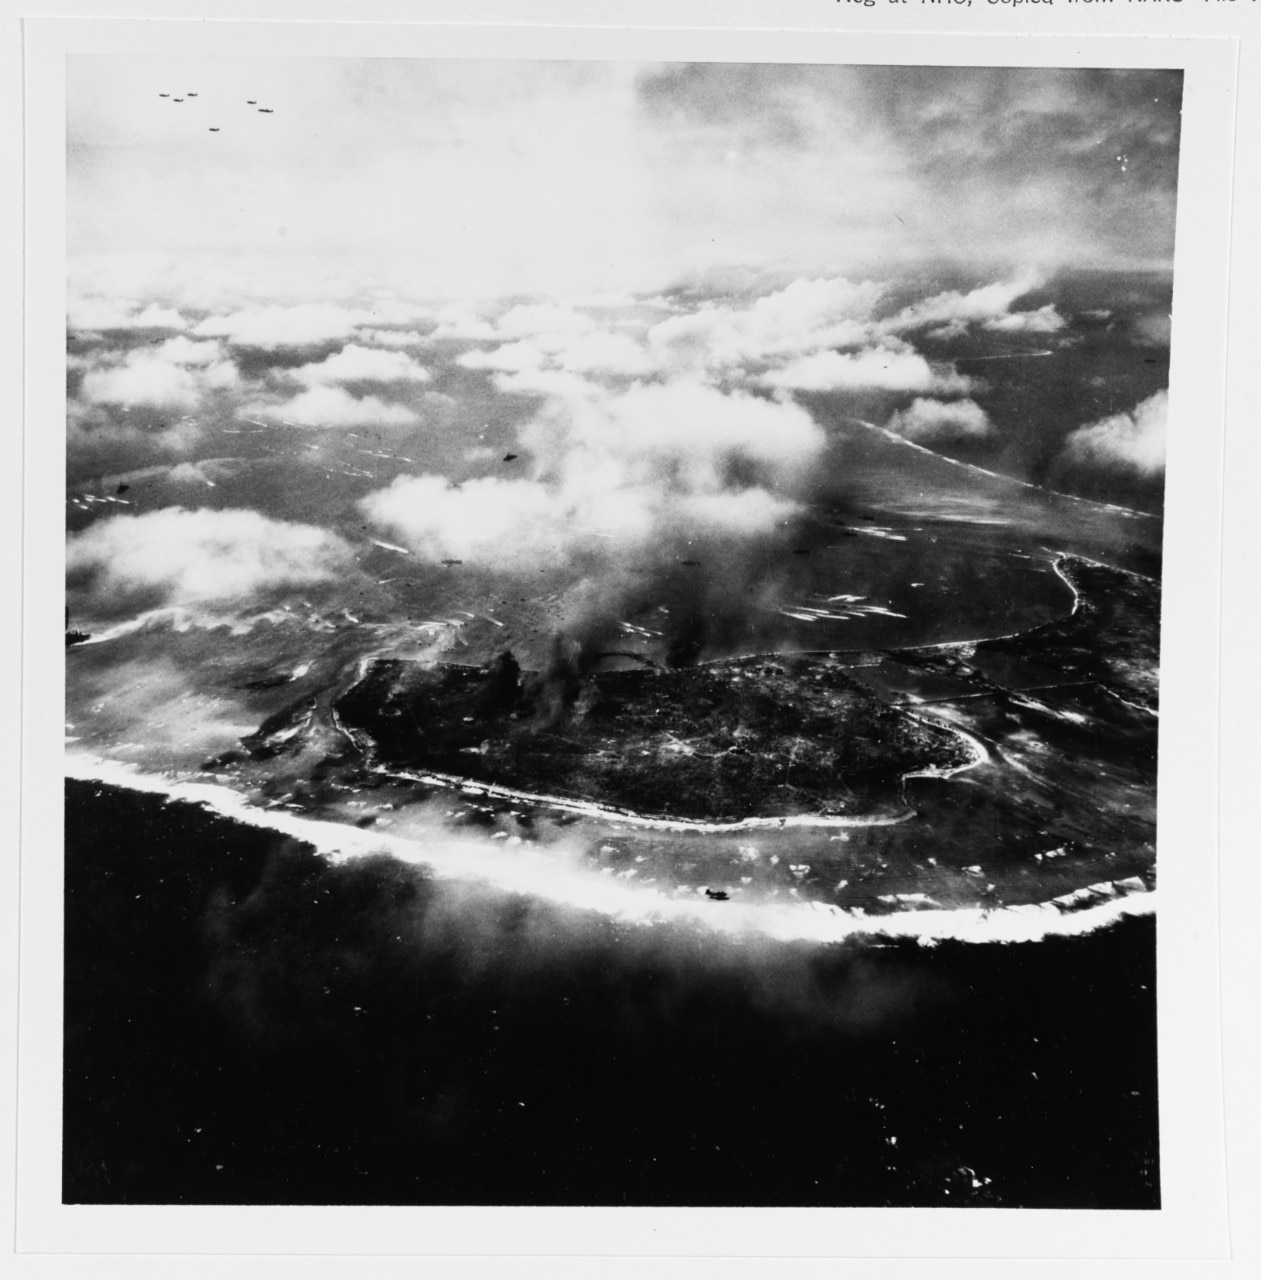 Assault landing craft approach Namur (center) and Roi (right) Islands, Kwajalein Atoll, during landings on them, 1 February 1944. Note devastation on Namur Island, with smoke still rising from bombardment. A flock of TBM bombers is in the upper left, and a single OS2U is in lower center. Photographed by a USS SUWANEE (CVE-27) plane. Naval History and Heritage Command Photo.